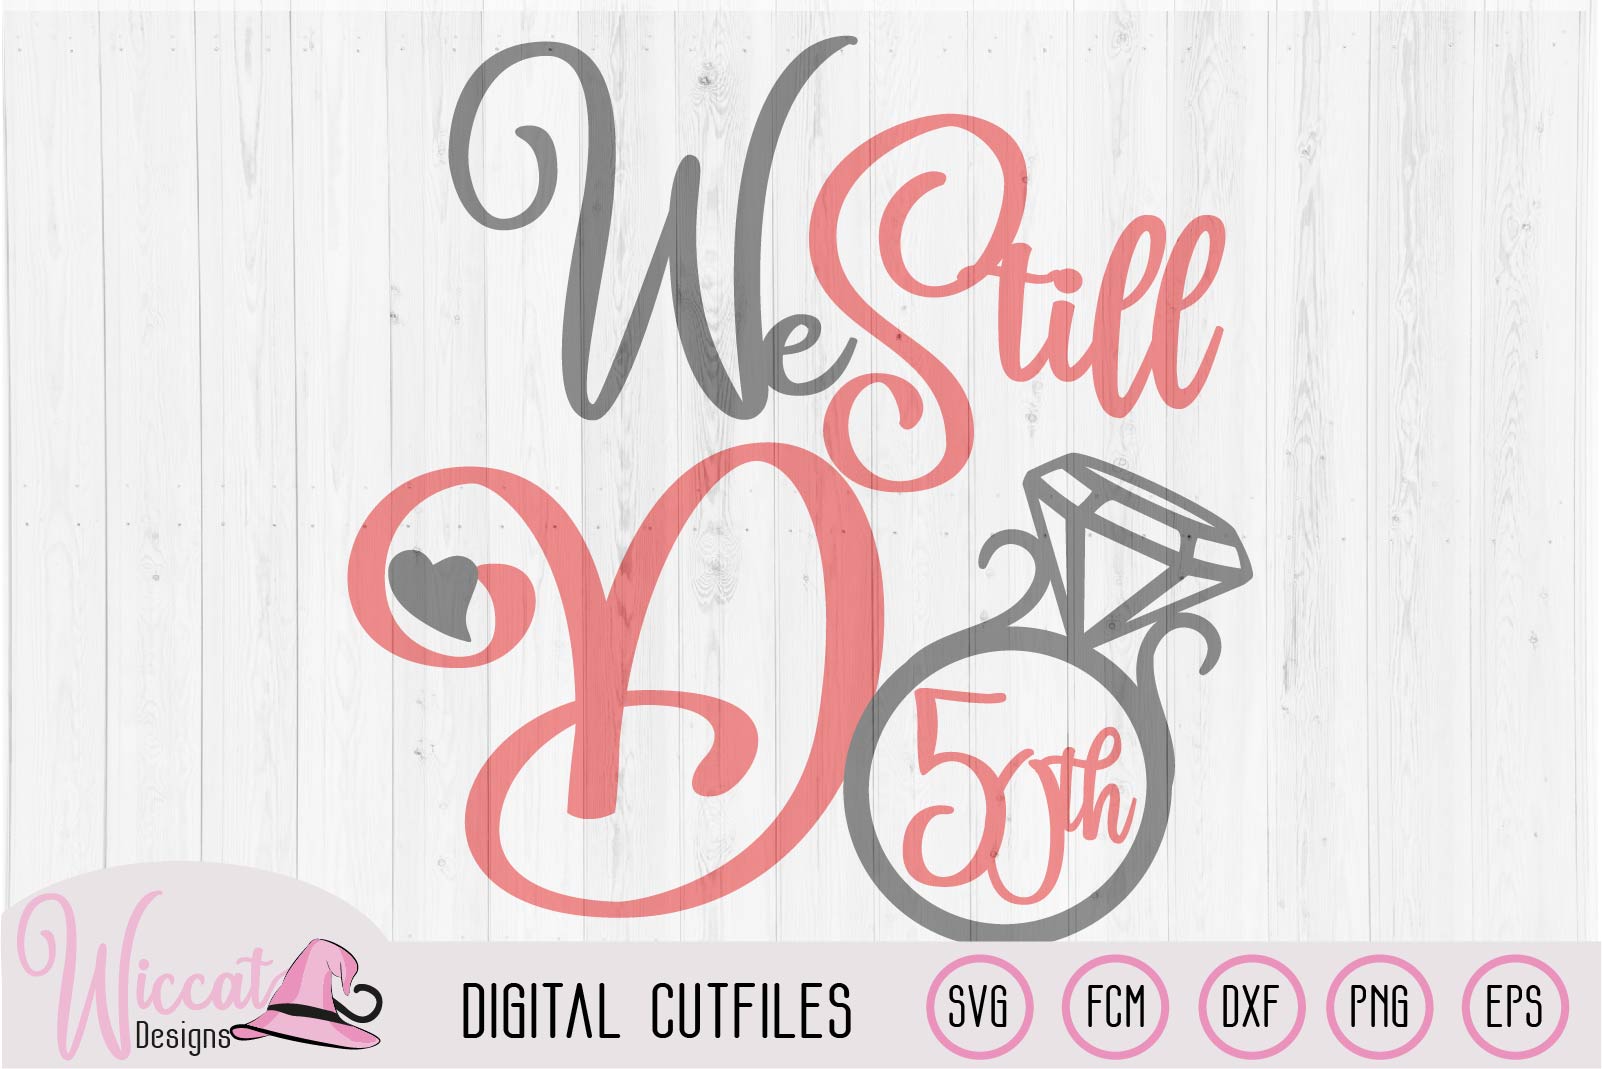 Download Get 50th Anniversary Svg Free Pics Free Svg Files Silhouette And Cricut Cutting Files